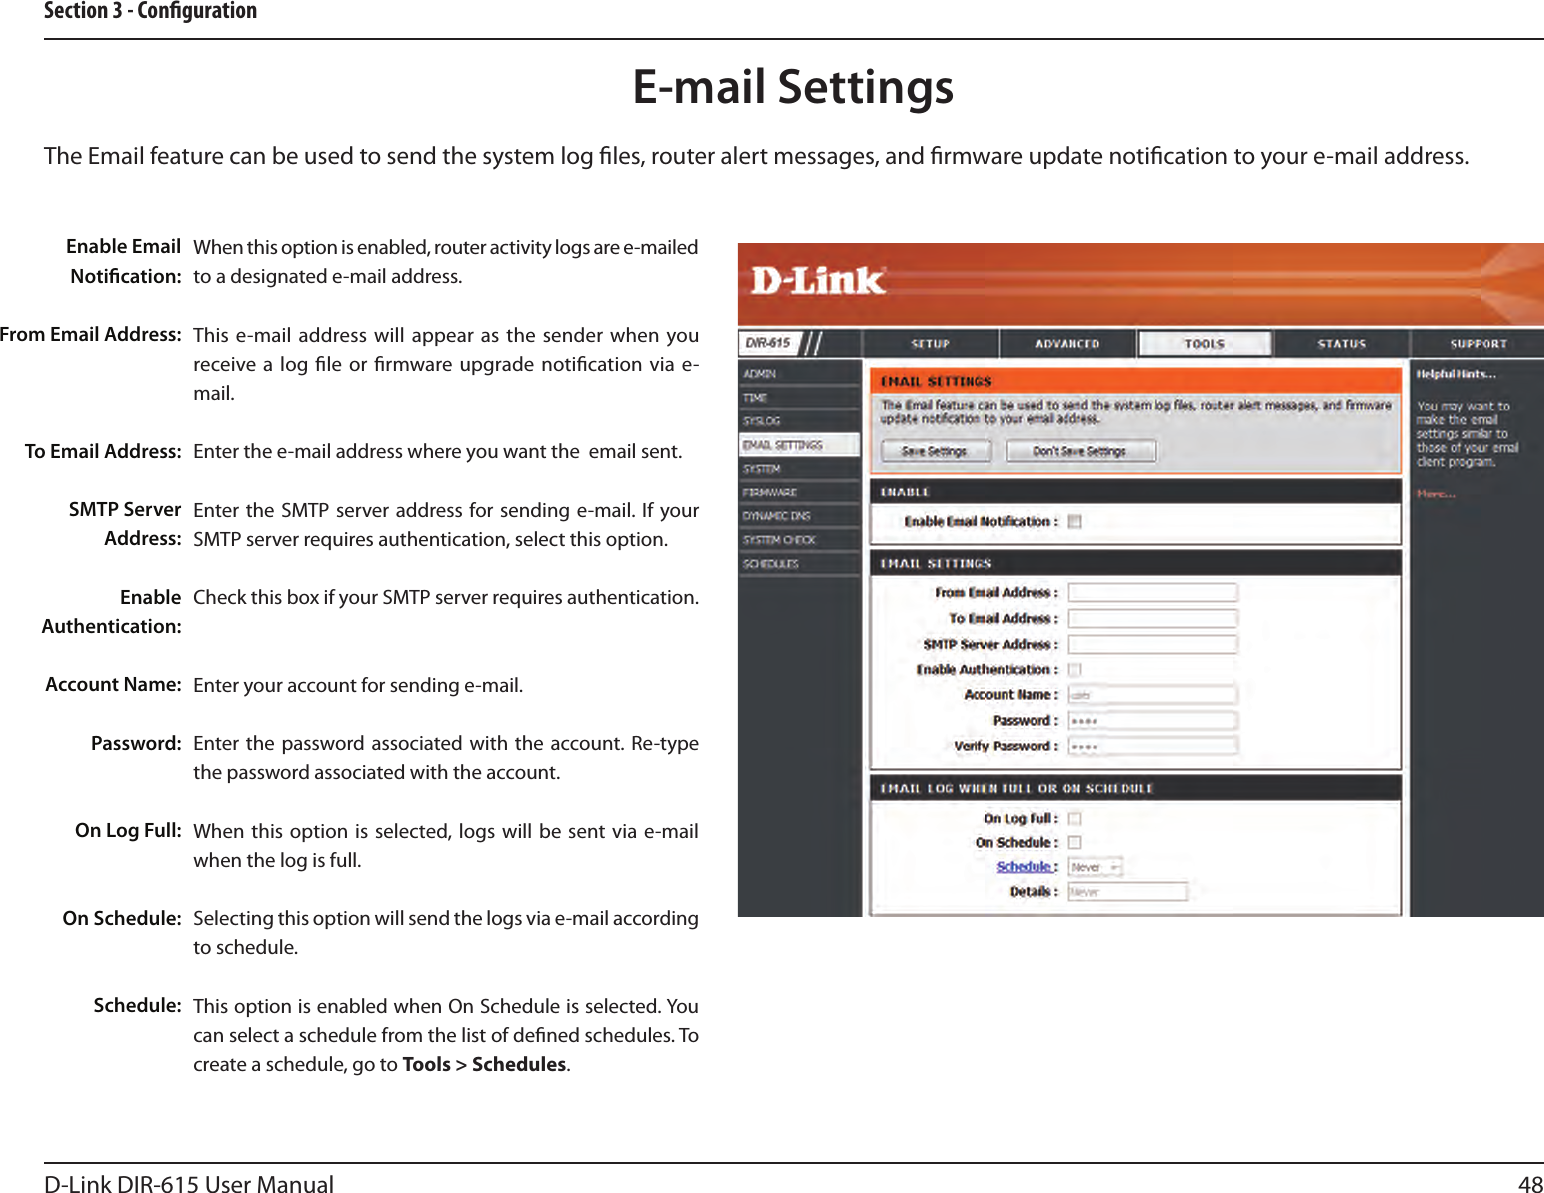 48D-Link DIR-615 User ManualSection 3 - CongurationE-mail SettingsThe Email feature can be used to send the system log les, router alert messages, and rmware update notication to your e-mail address. Enable Email Notication: From Email Address:To Email Address:SMTP Server Address:Enable Authentication:Account Name:Password:On Log Full:On Schedule:Schedule:When this option is enabled, router activity logs are e-mailed to a designated e-mail address.This e-mail  address will appear as the  sender  when  you receive a log le or rmware upgrade notication  via e-mail.Enter the e-mail address where you want the  email sent. Enter the  SMTP server address for sending  e-mail. If your SMTP server requires authentication, select this option.Check this box if your SMTP server requires authentication. Enter your account for sending e-mail.Enter the  password associated with  the  account. Re-type the password associated with the account.When this option  is  selected, logs  will be sent via e-mail when the log is full.Selecting this option will send the logs via e-mail according to schedule.This option is enabled when On Schedule is selected. You can select a schedule from the list of dened schedules. To create a schedule, go to Tools &gt; Schedules.